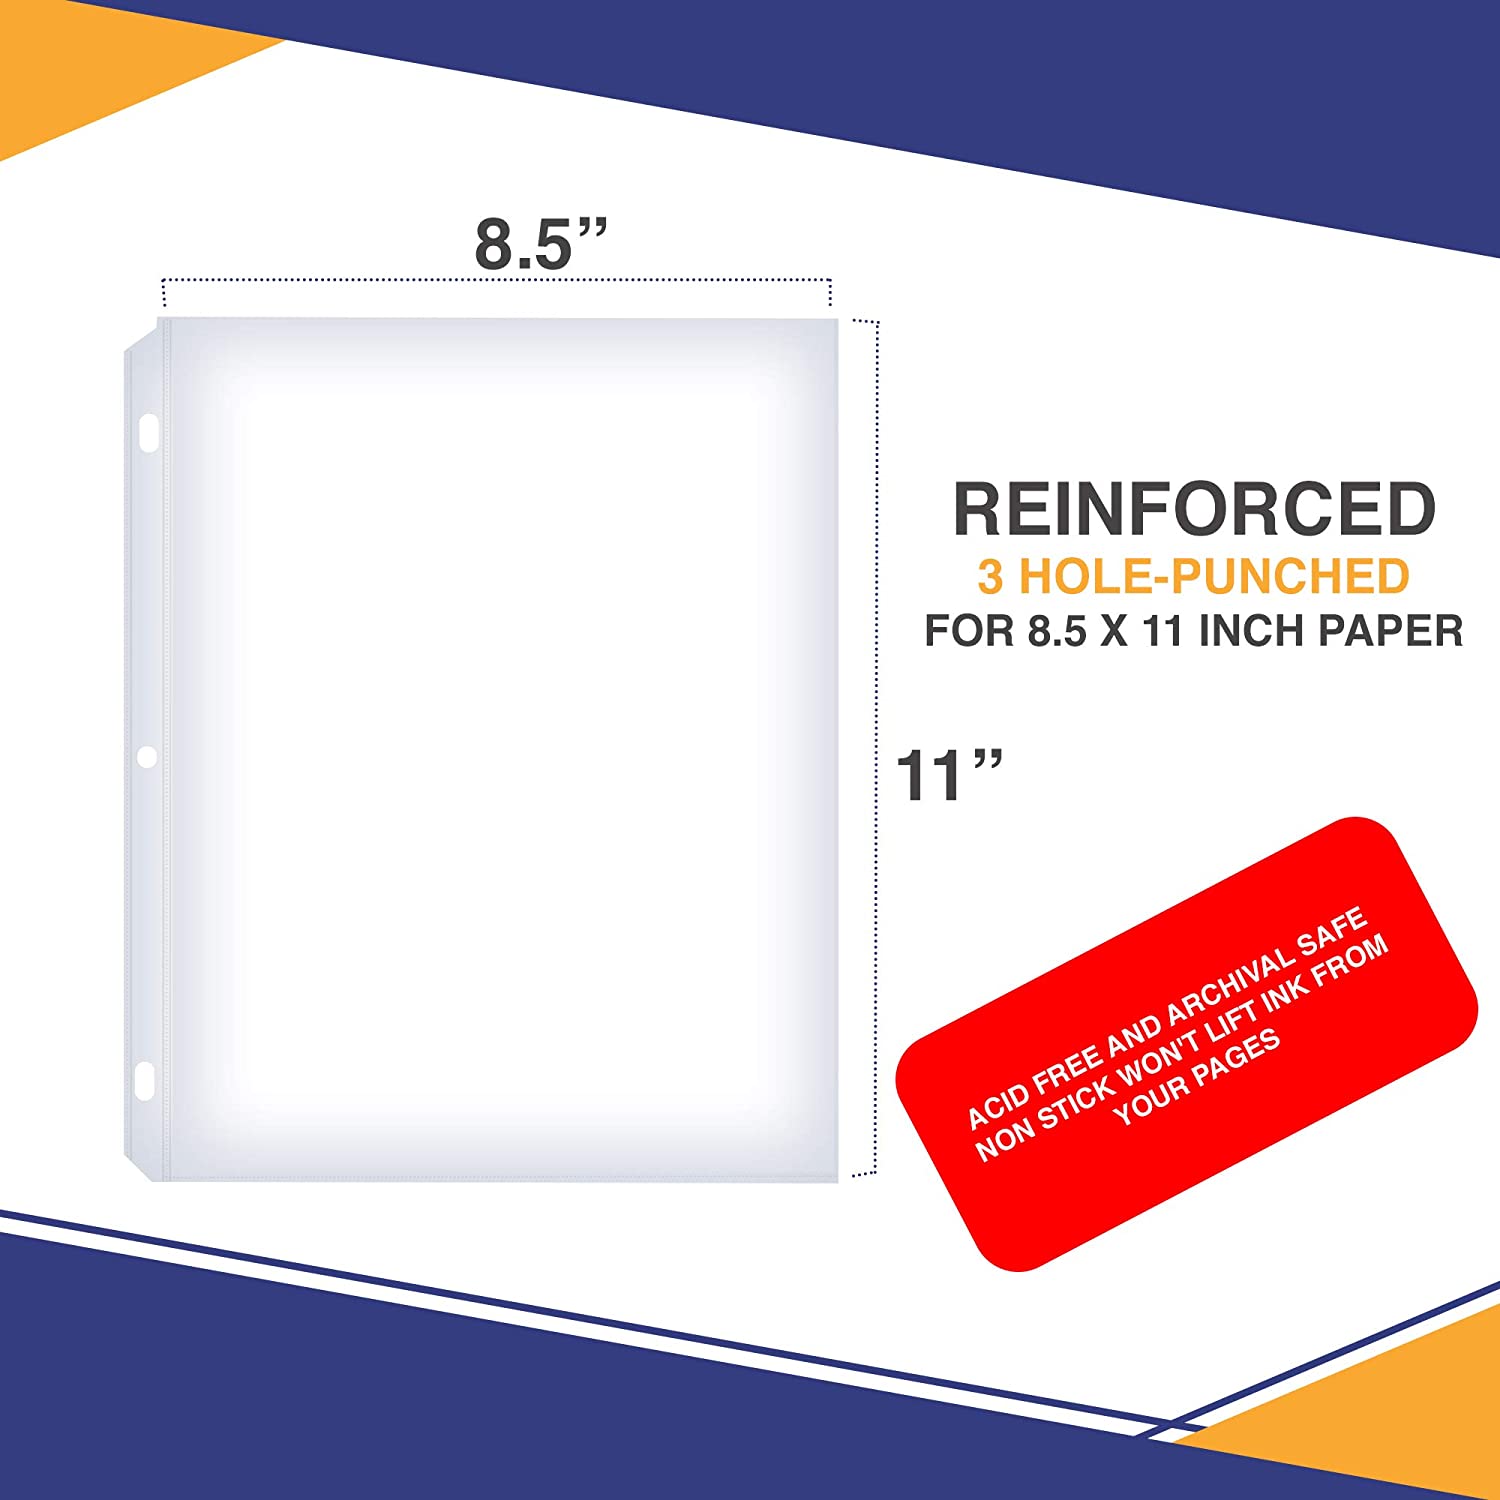 11x17 Sheet Protectors Side Loading with No Holes 25 Sleeves Heavy Gauge Non-Archival Clear